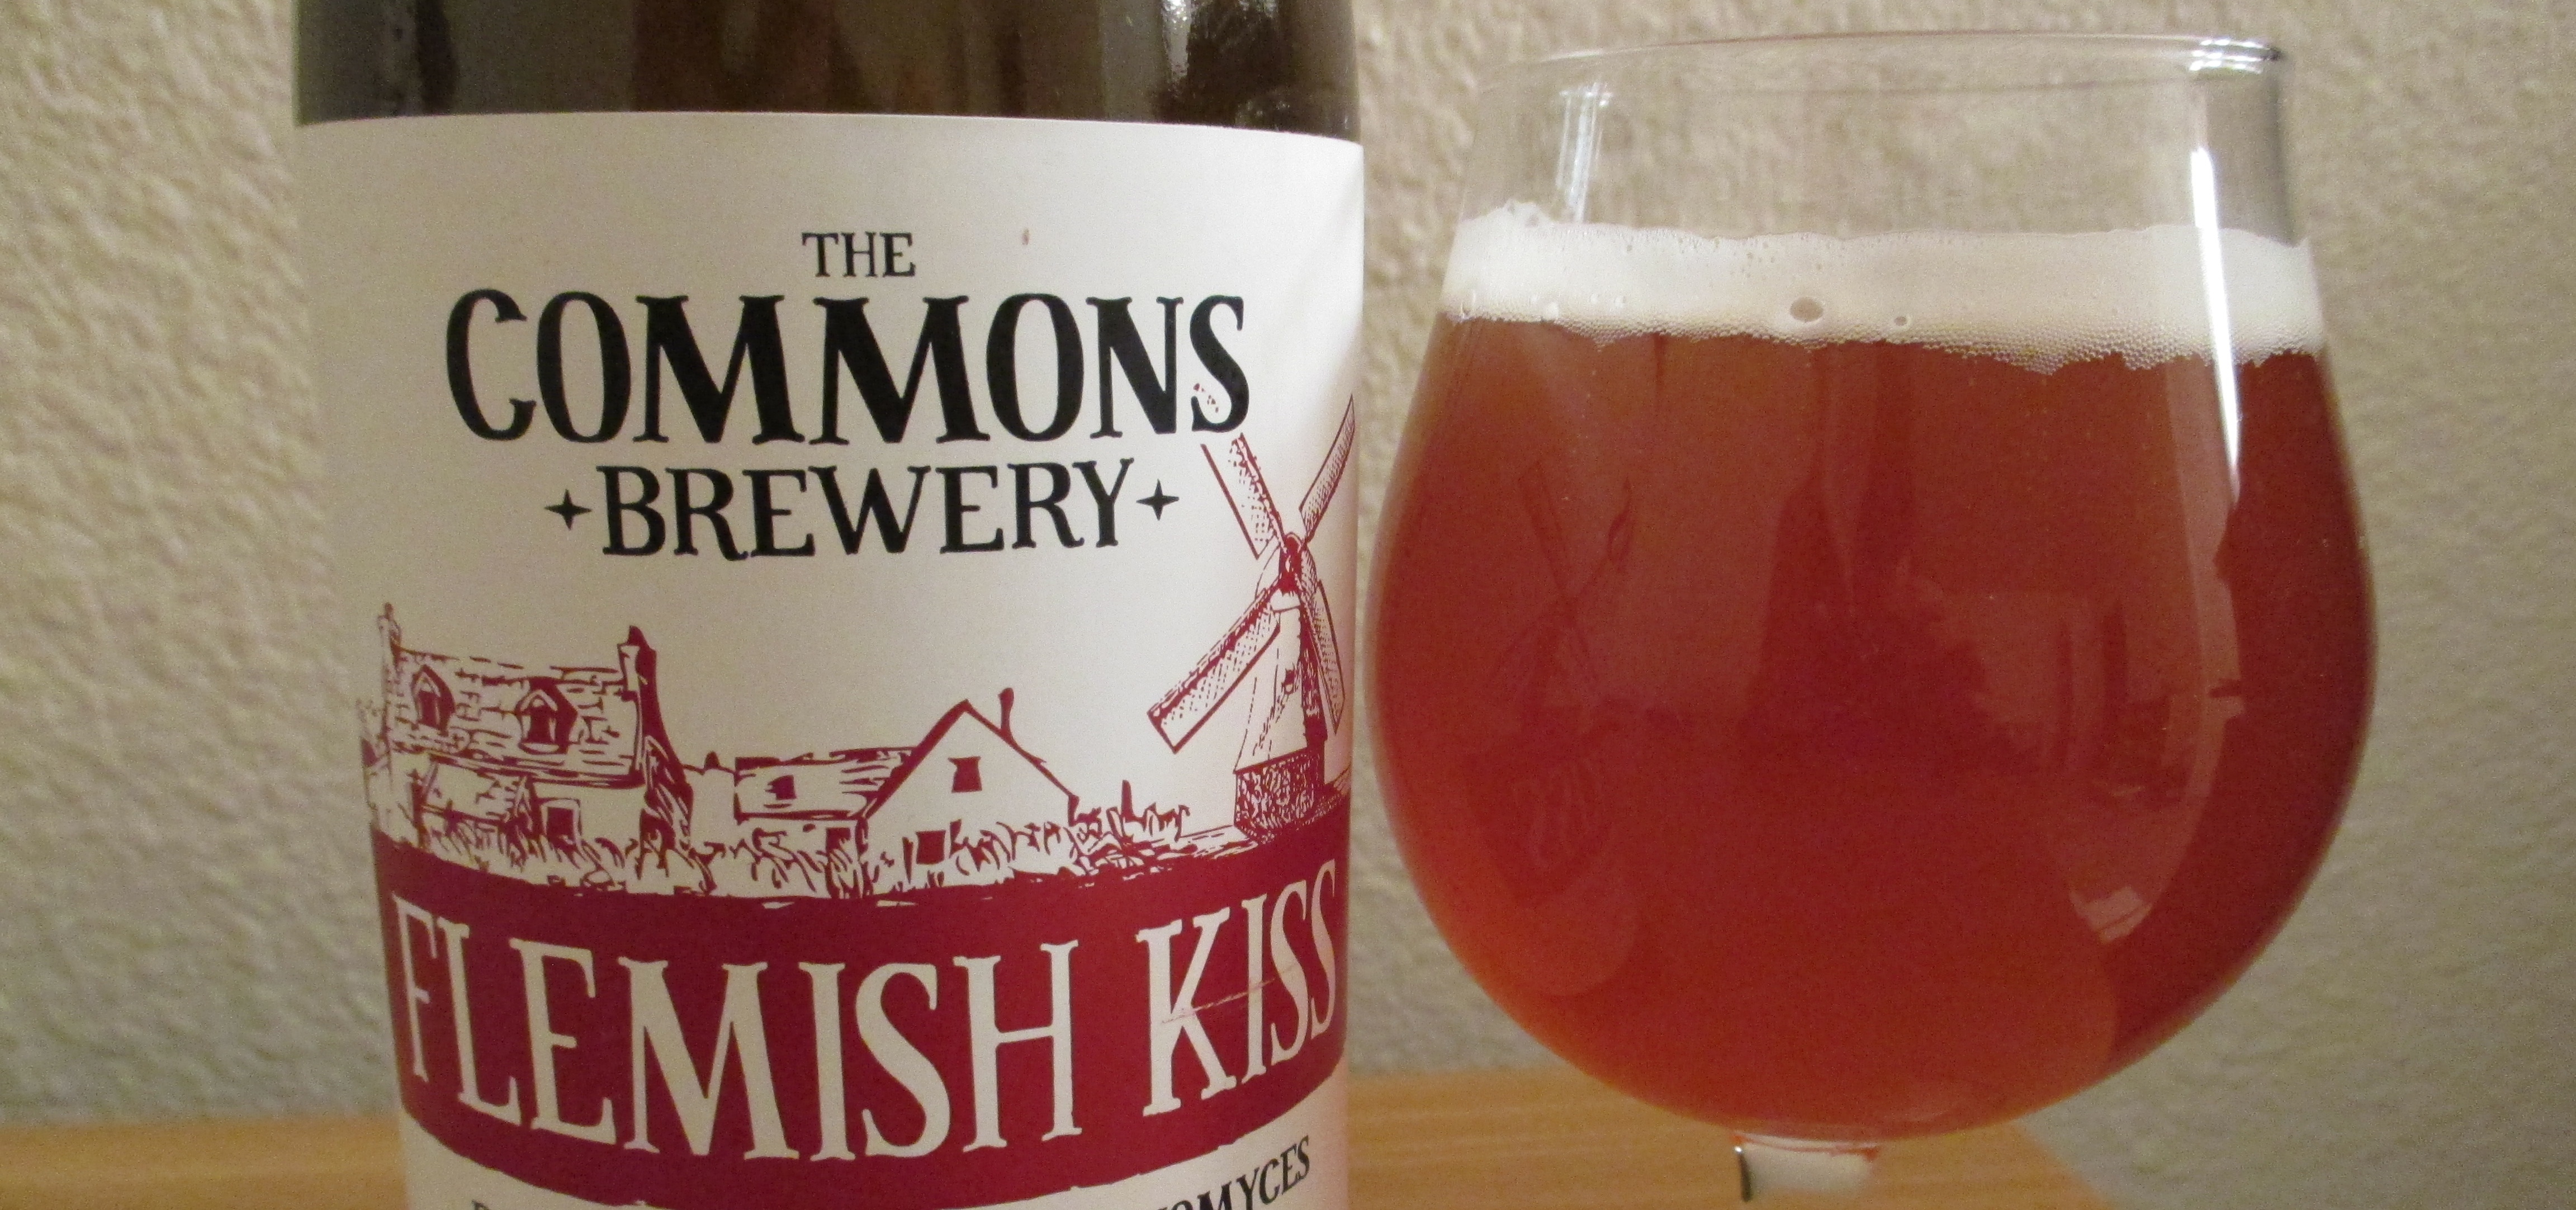 The Commons Brewery- Flemish Kiss